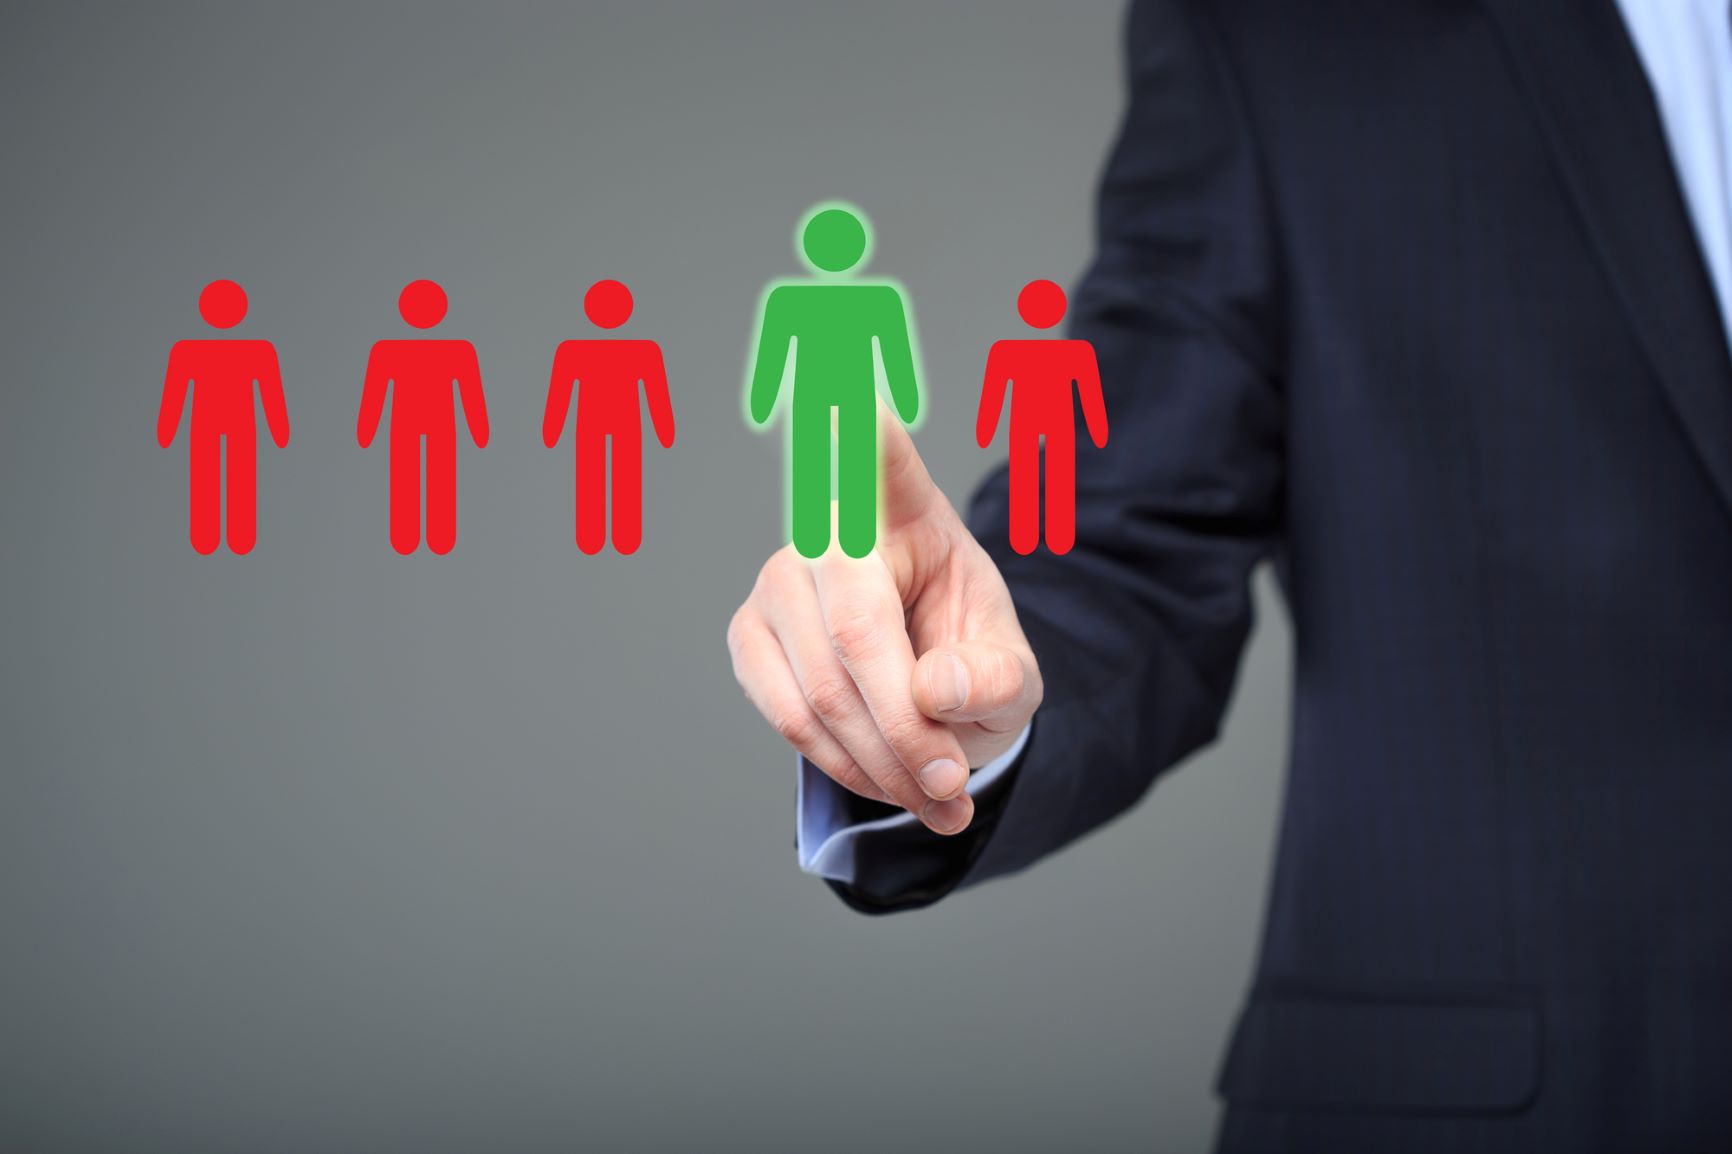 A row of five animated human icons, four the same size and colored red, while one is being indicated by a person in a business suit, and appears larger and colored green.